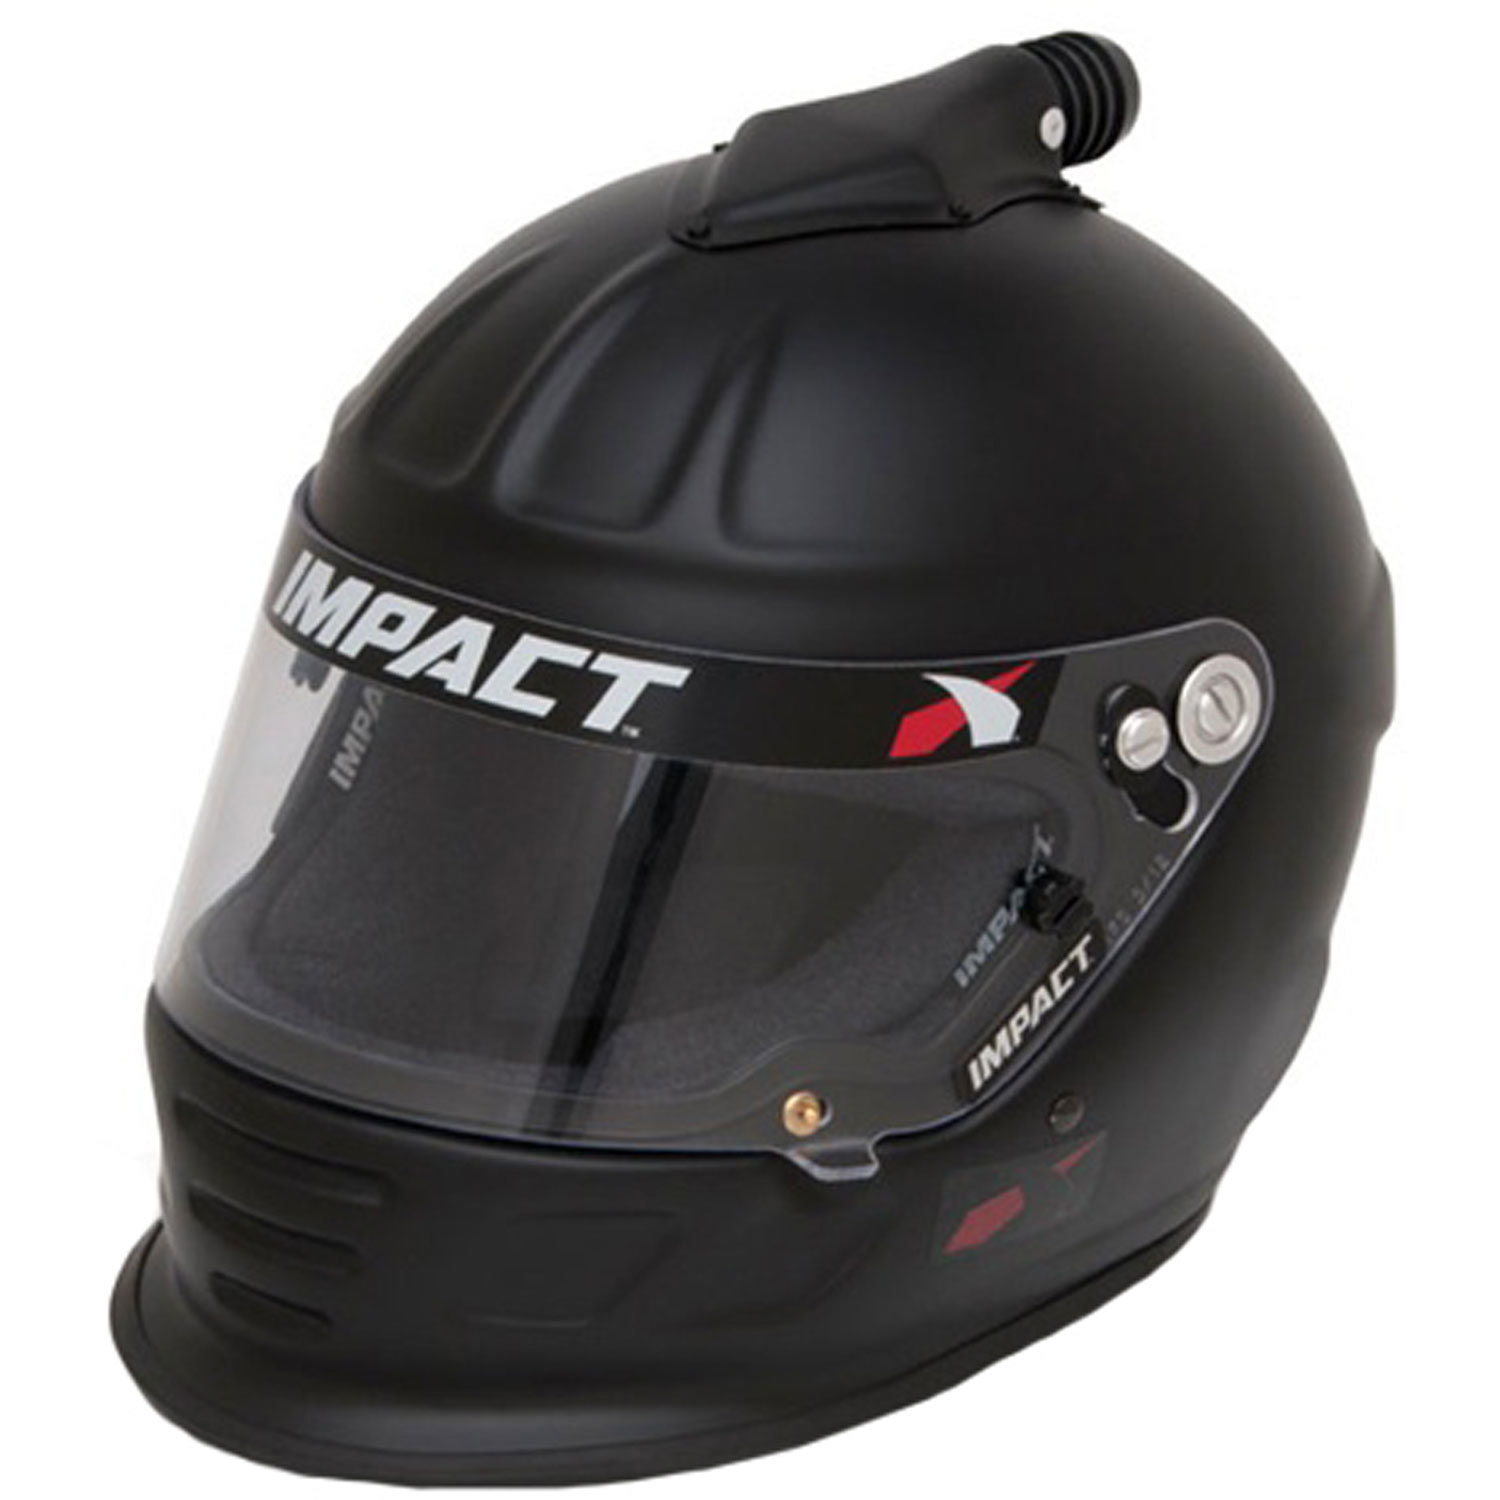 IMPACT RACING Helmet, Air Draft, Snell SA2015, Head and Neck Support Ready, Flat Black, Large, Each